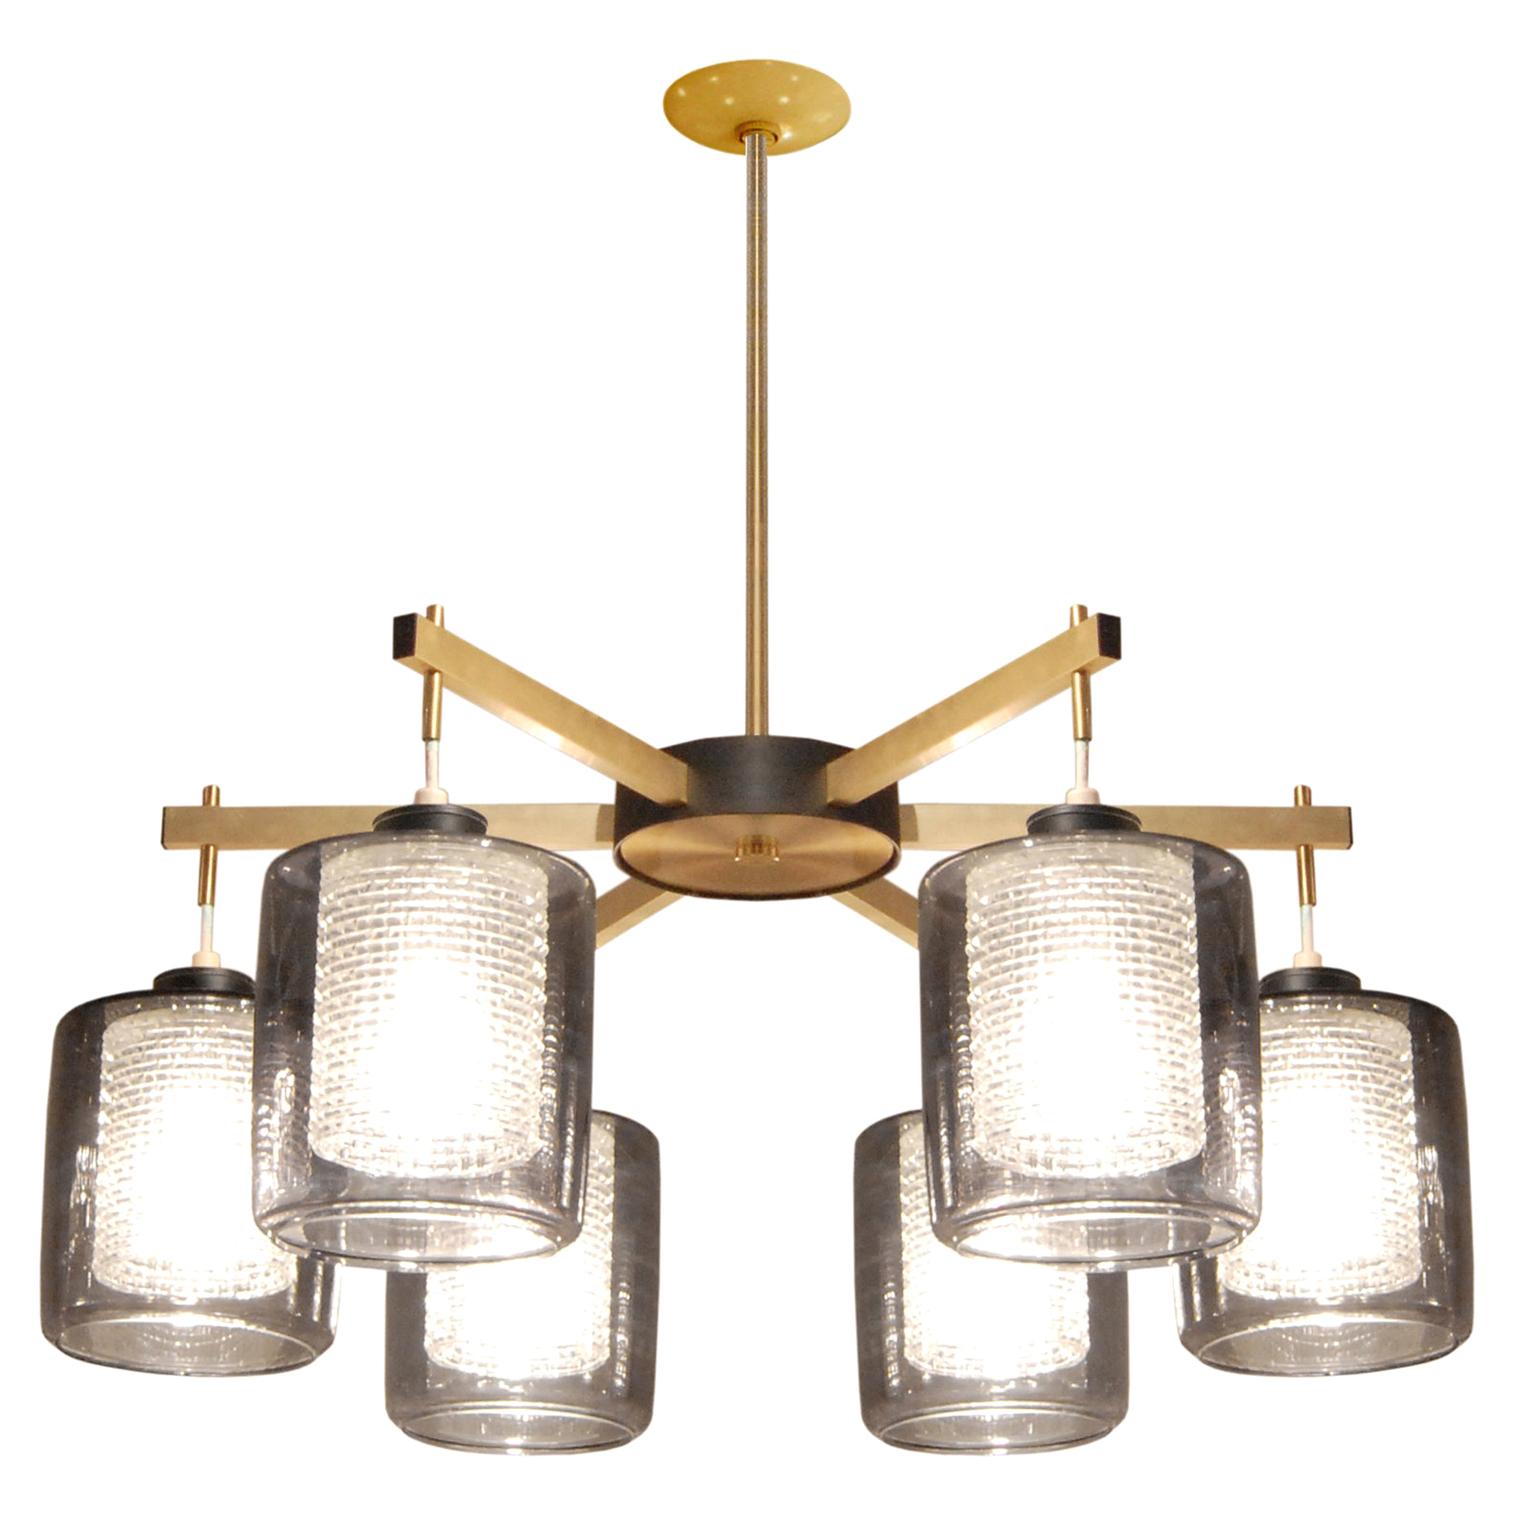 Lightolier Brass Chandelier with Diffusers & Smoked Glass Shades, 1950s 'Signed'